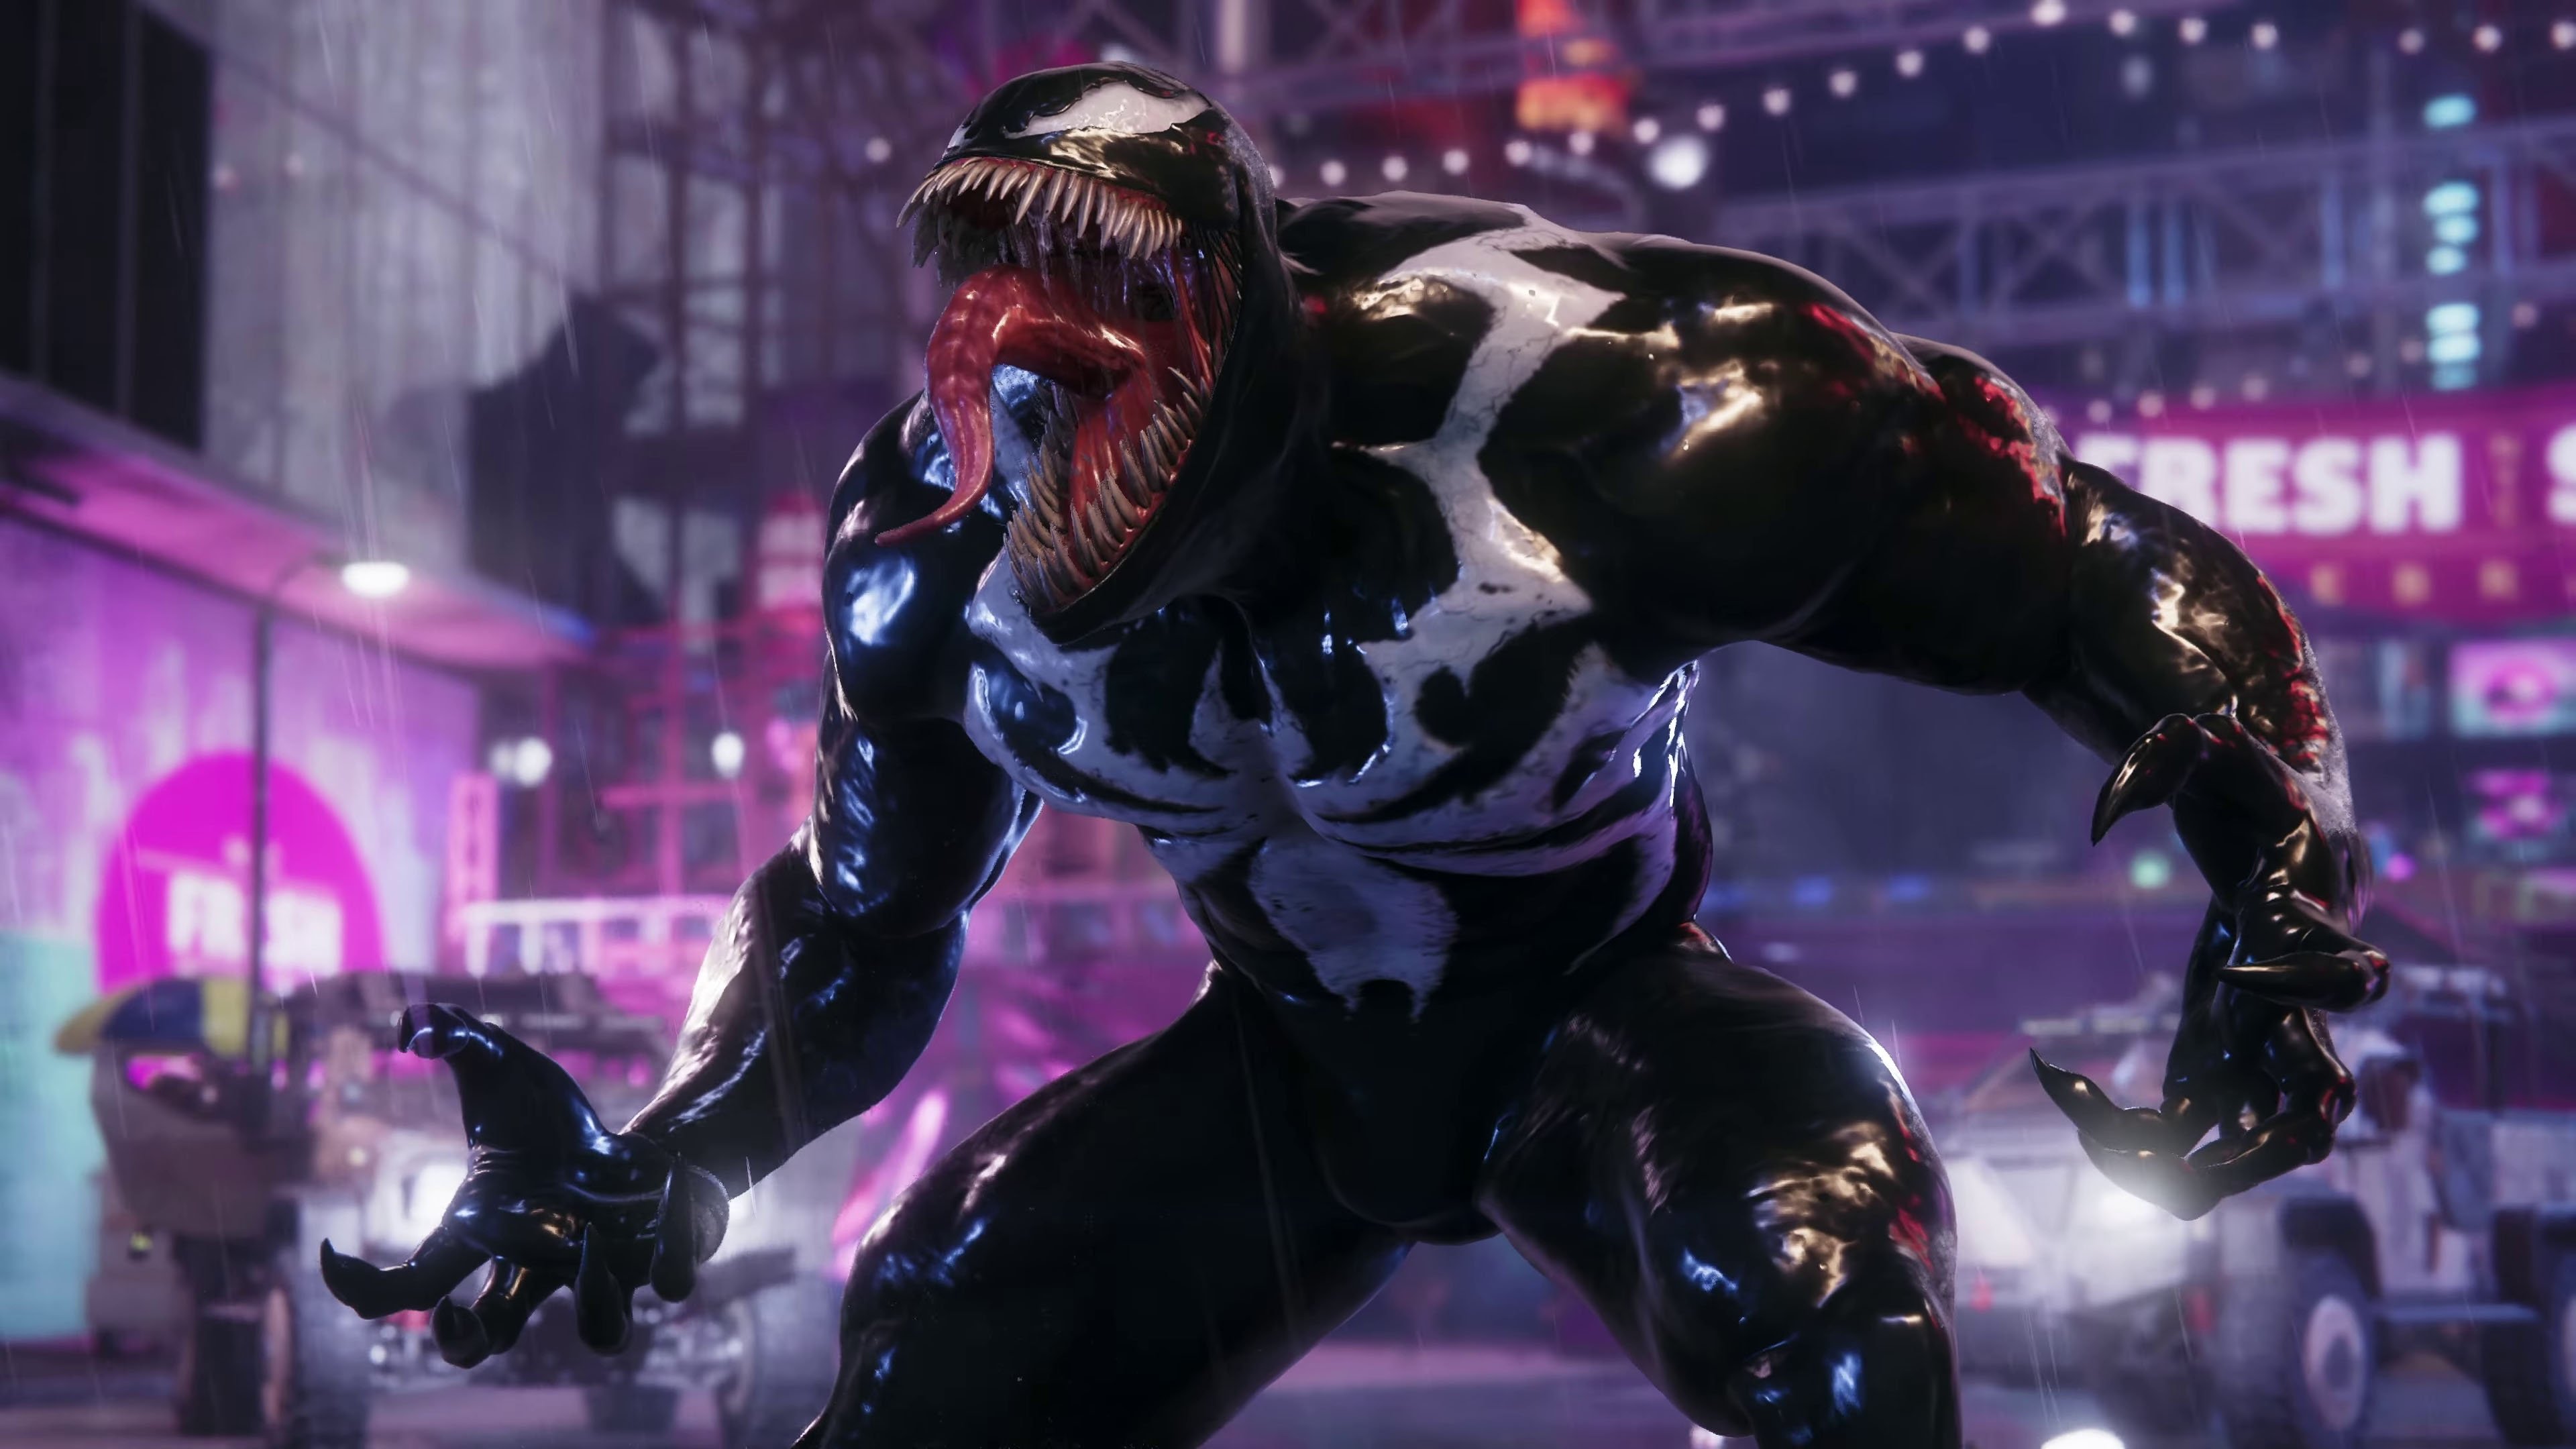 Marvel's Spider-Man 2 Is Already One of the Best Selling PS5 Games of the  Year